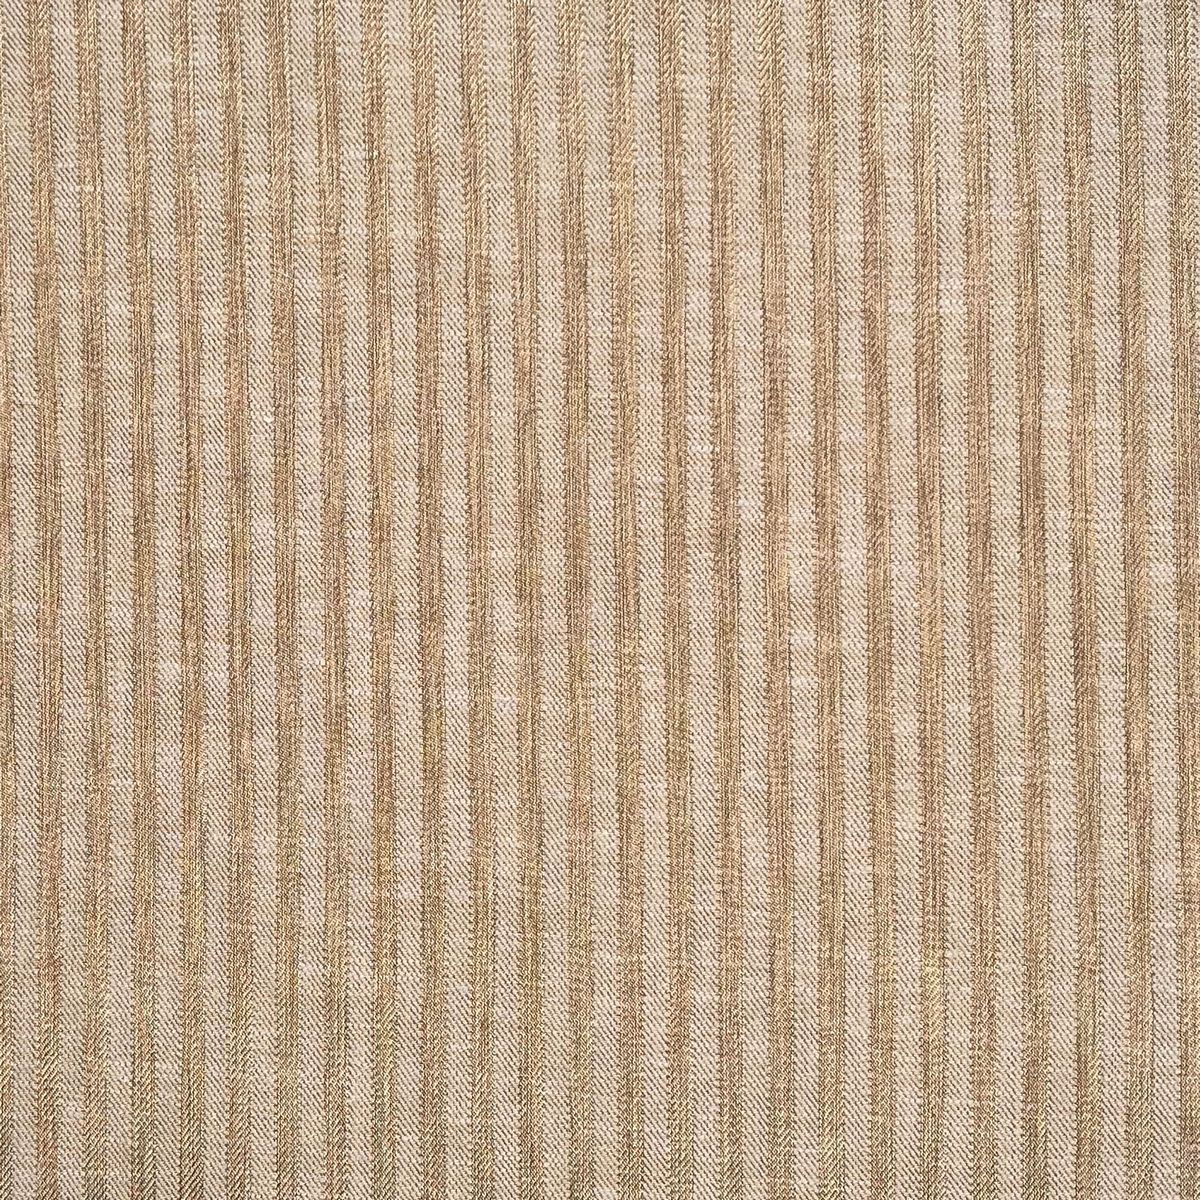 Moda Simply Taupe Fabric by Chatham Glyn